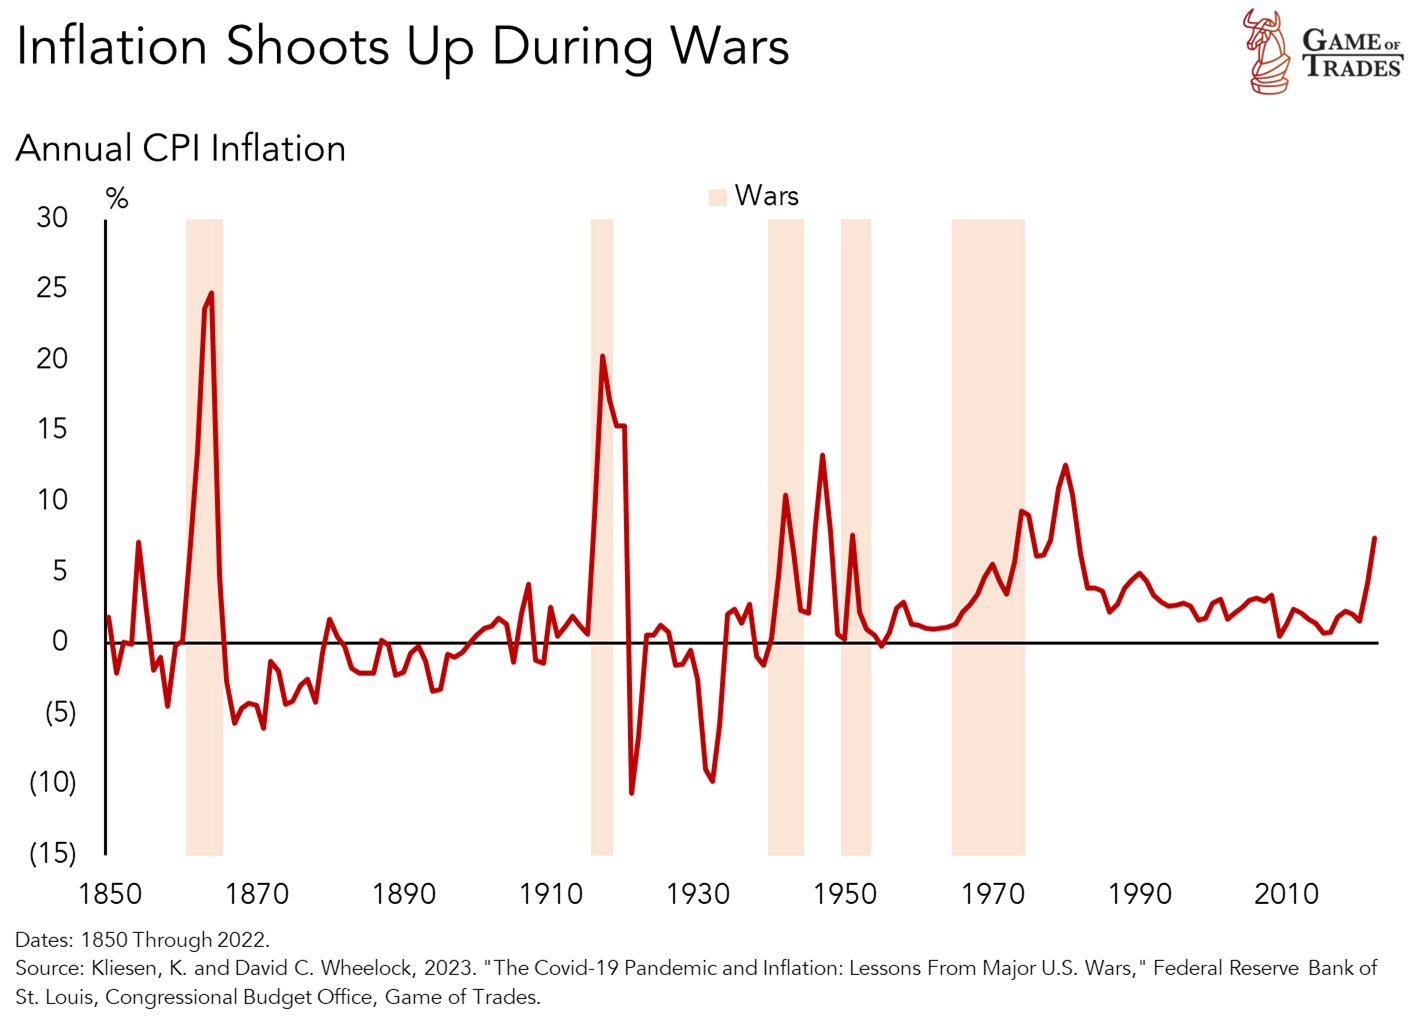 A chart pattern of game of trades showing that inflation shoots up during wars.